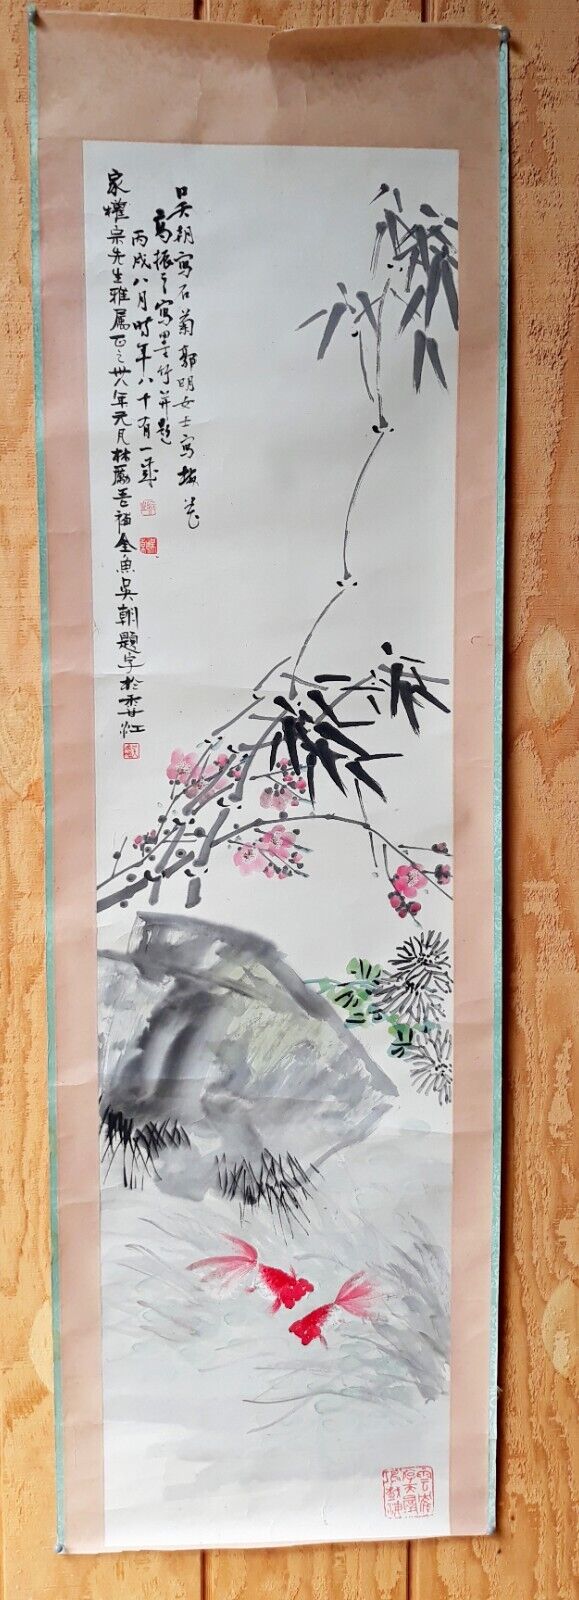 Vintage Chinese Watercolor Nature Koi Fish Scroll Painting - Signed 56